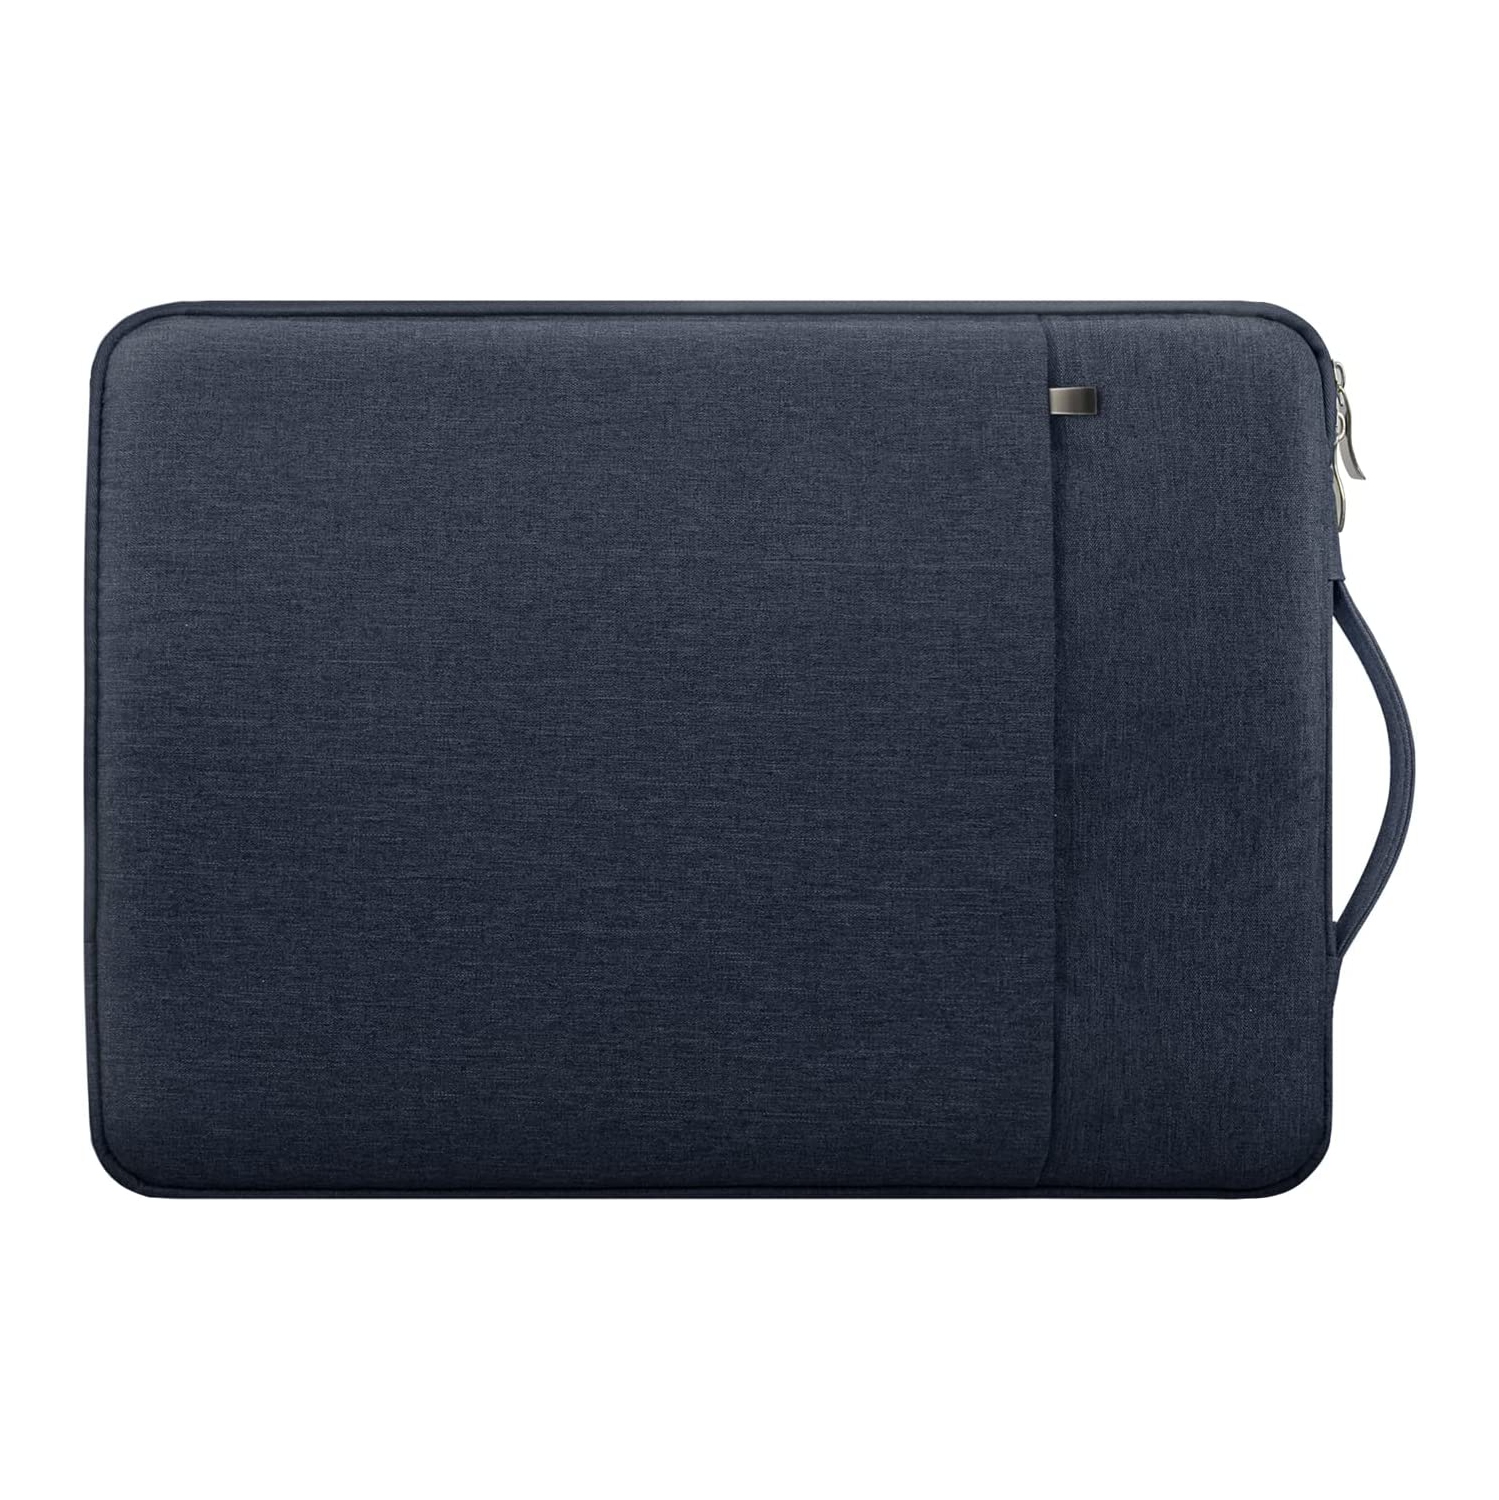 Laptop Sleeve Case 16 Inch Specially for New 16" MacBook Pro M1 Pro/Max A2485 A2141 2021-2019, Protective